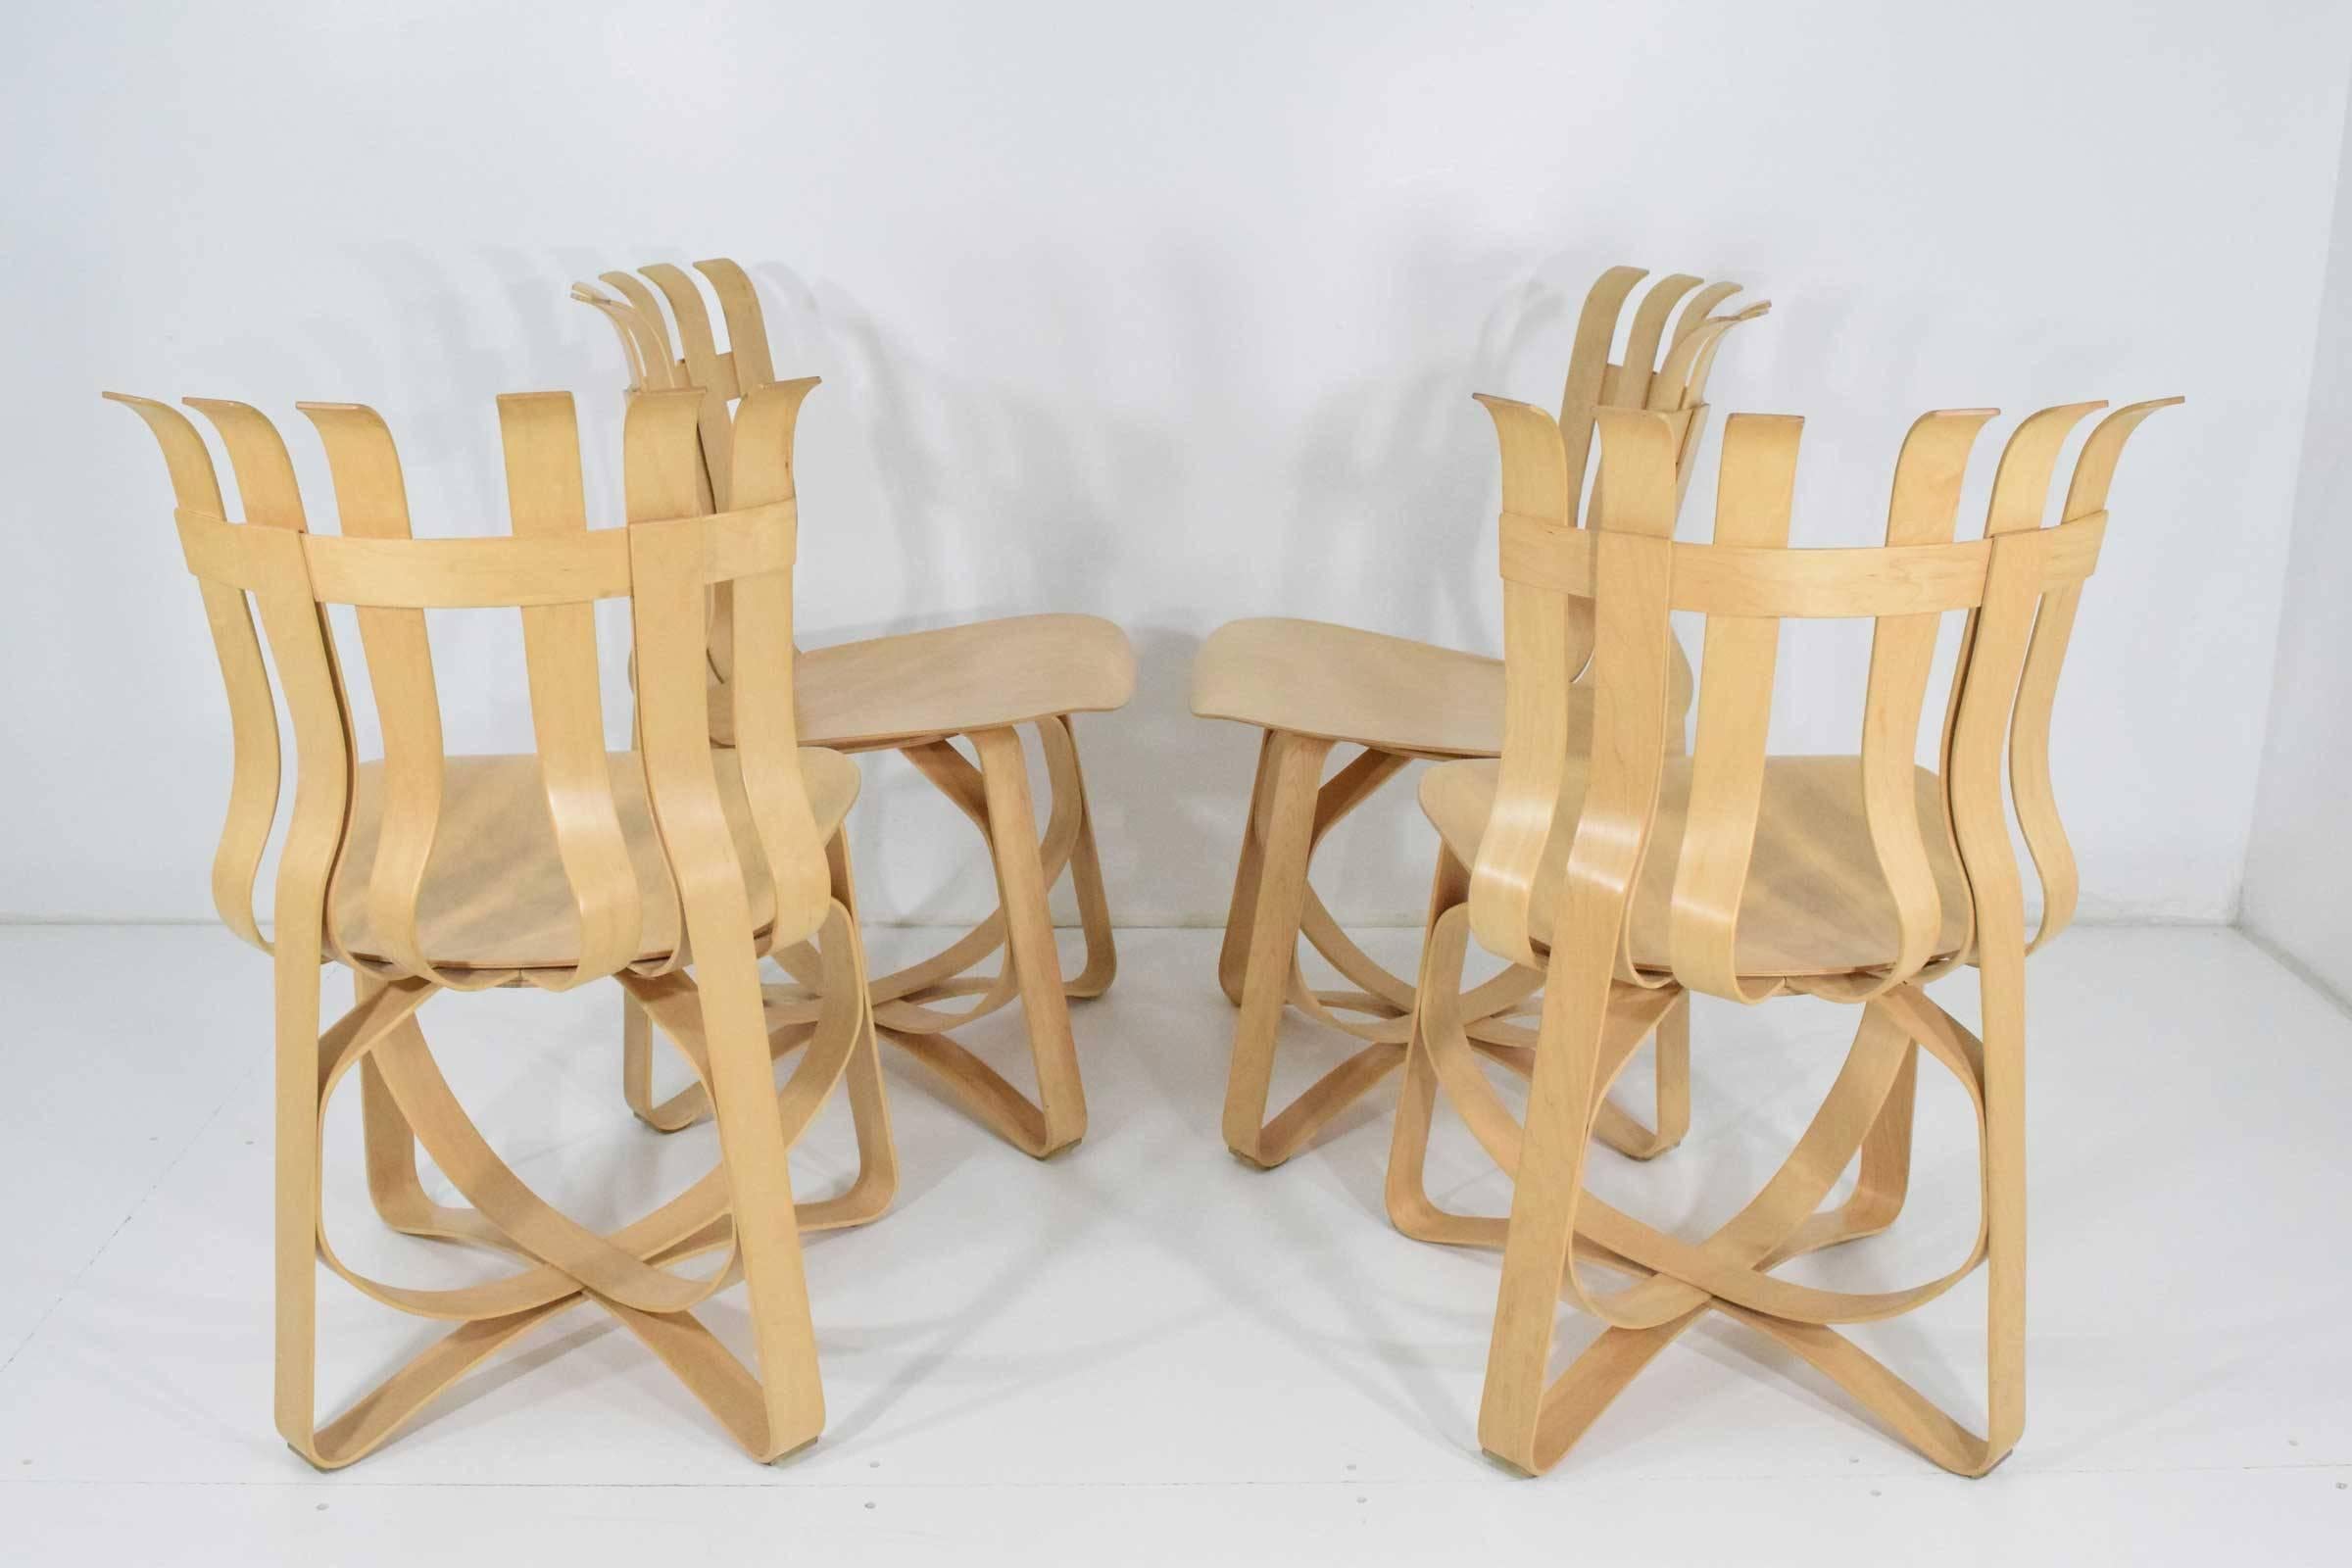 Contemporary Frank Gehry Hat Trick Chairs by Knoll